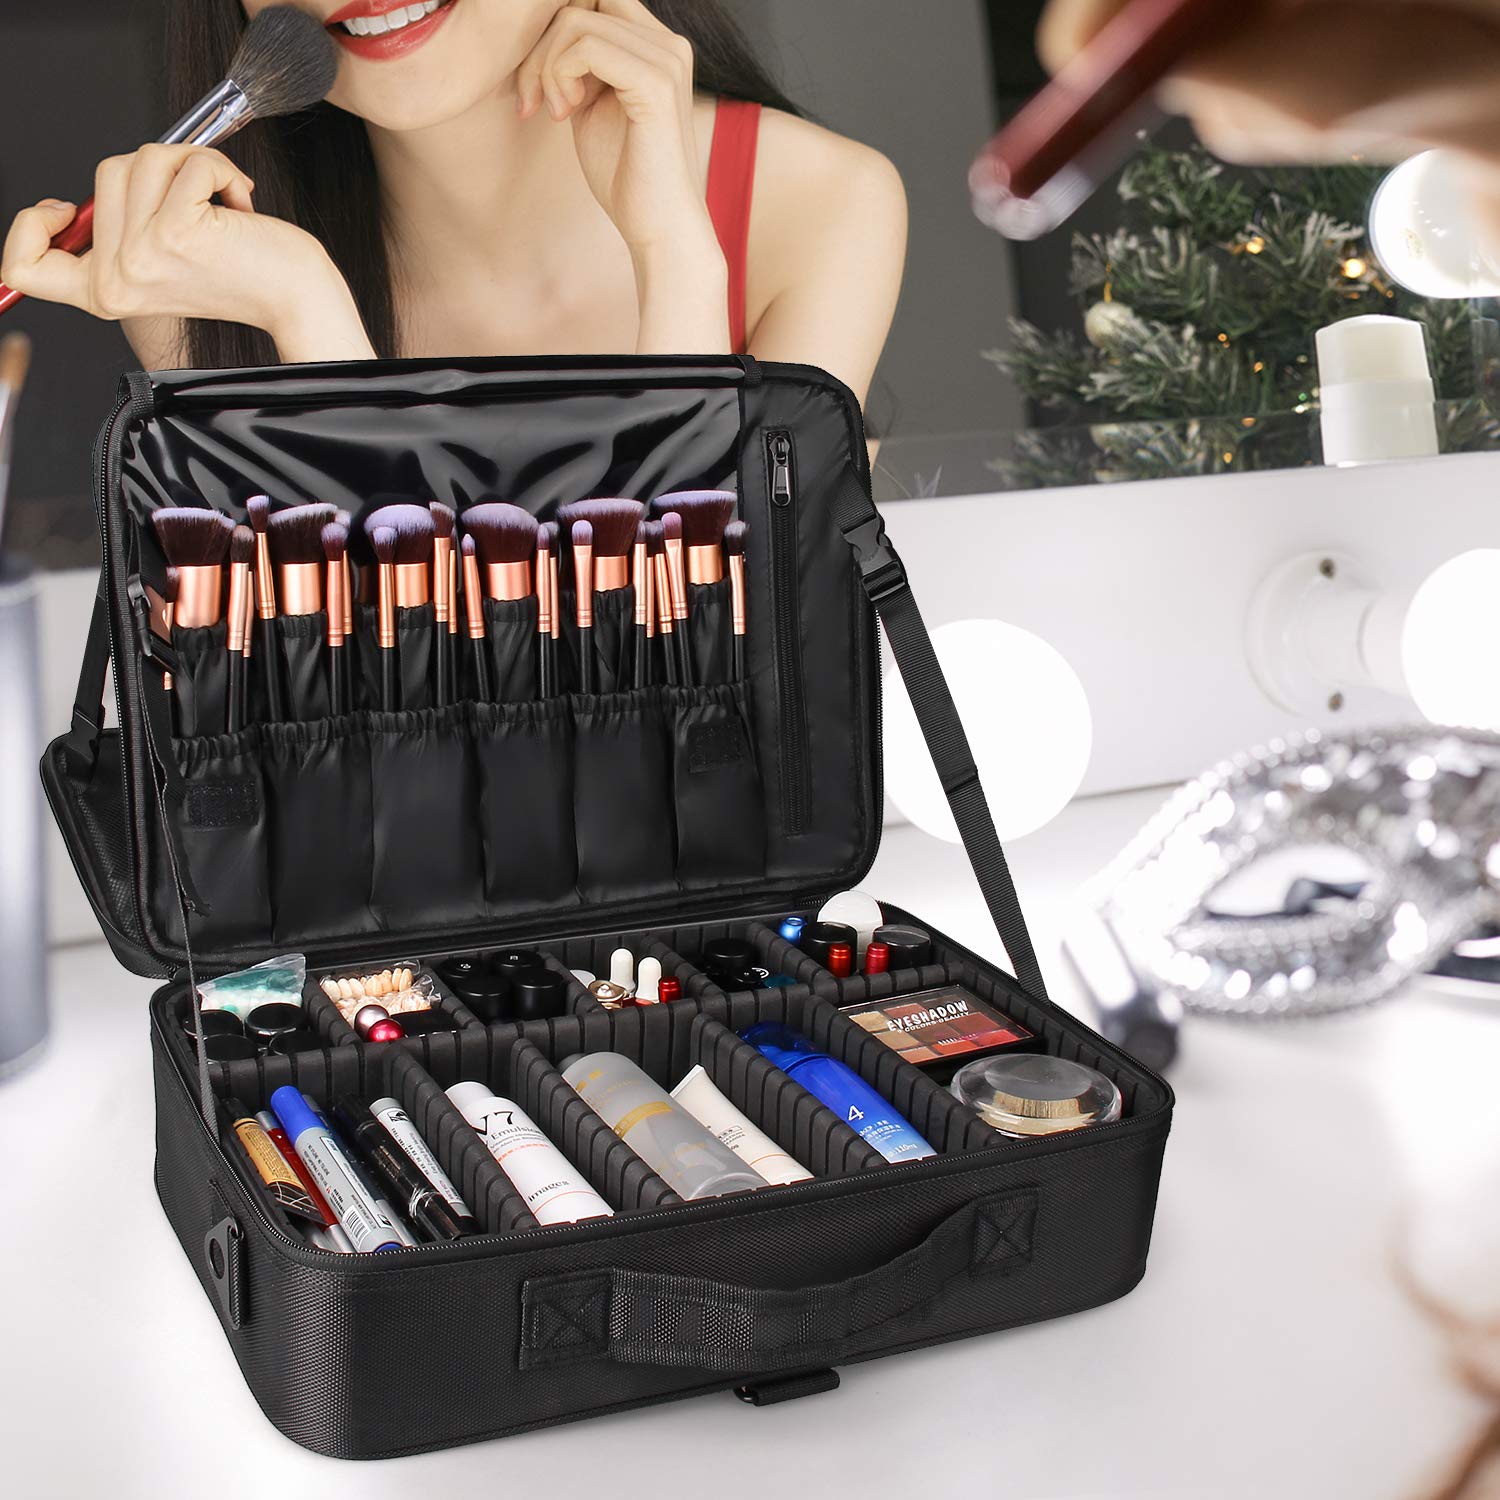 Relavel Makeup Case Large Makeup Bag Professional Train Case 16.5 inches Travel Cosmetic Organizer Brush Holder Waterproof Makeup Artist Storage Box, 3 Layer Large Capacity, with Adjustable Strap